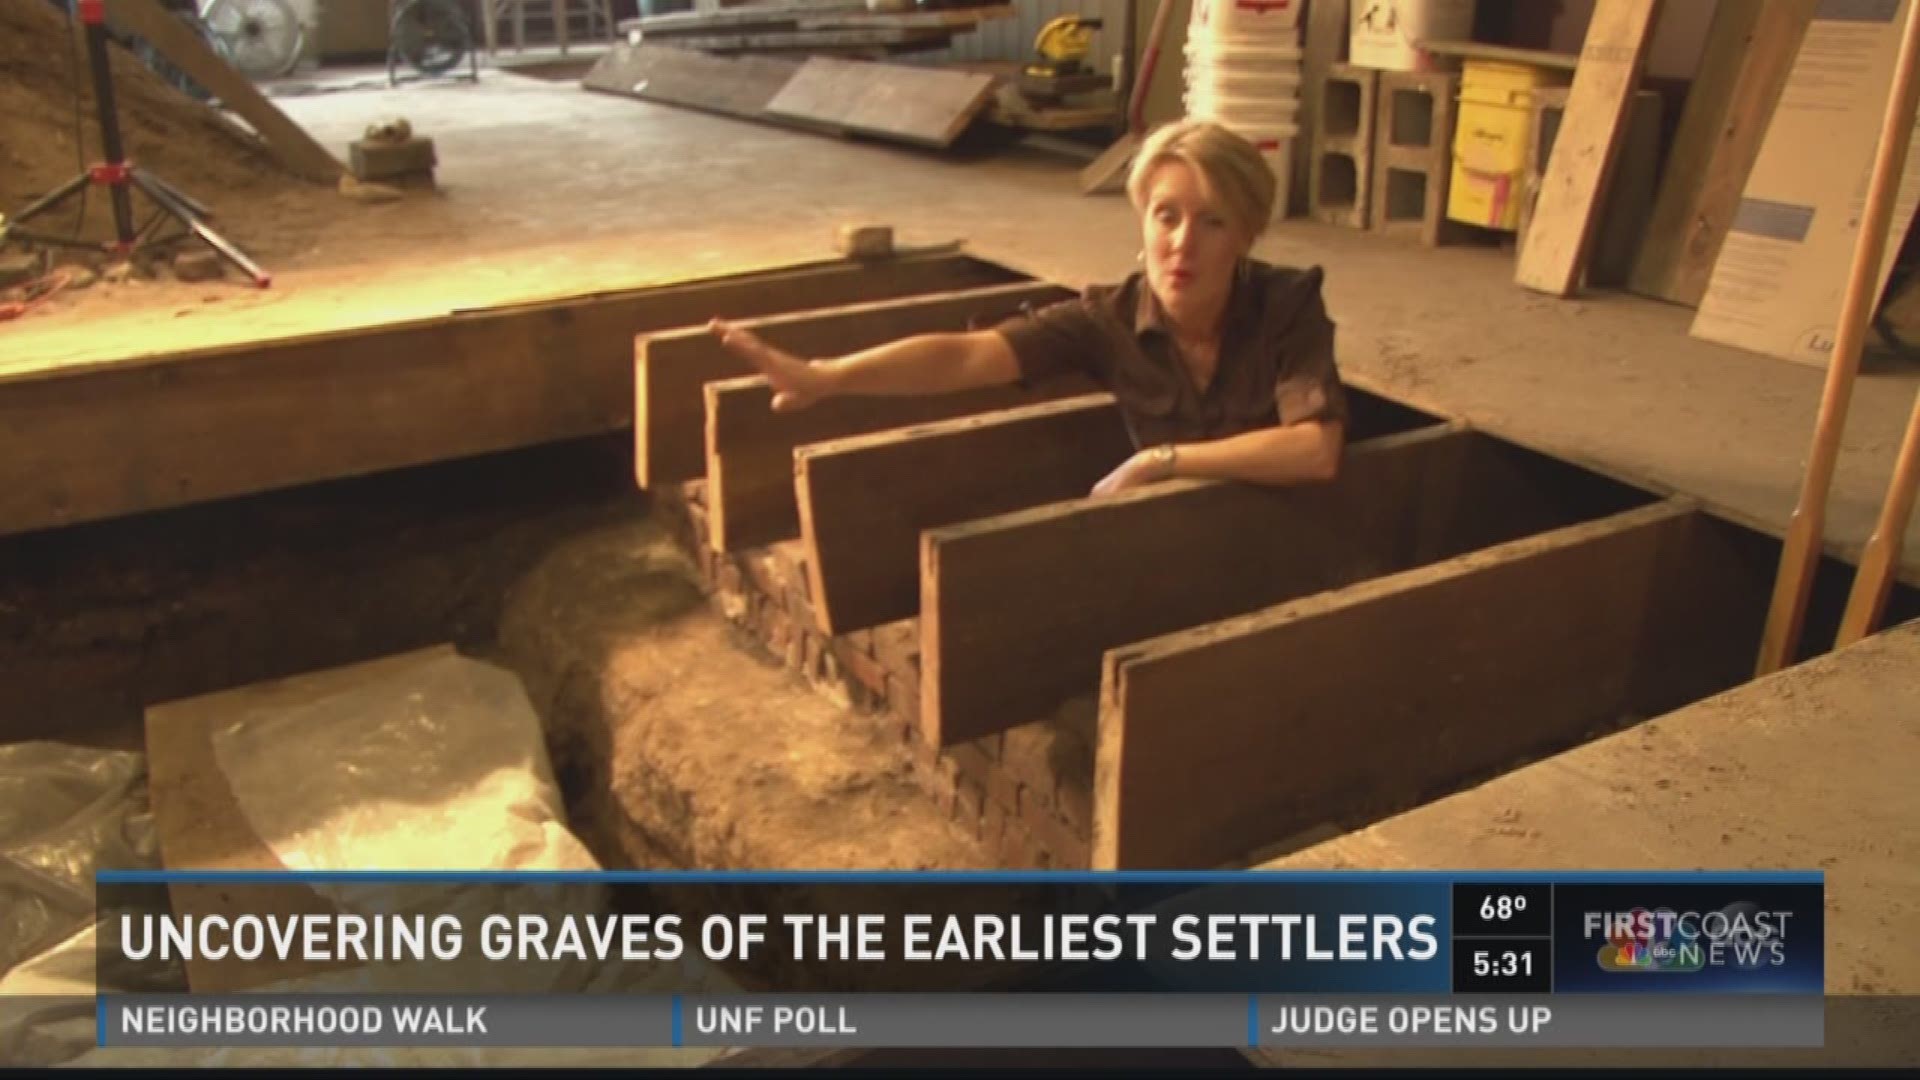 Uncovering graves of the earliest settlers